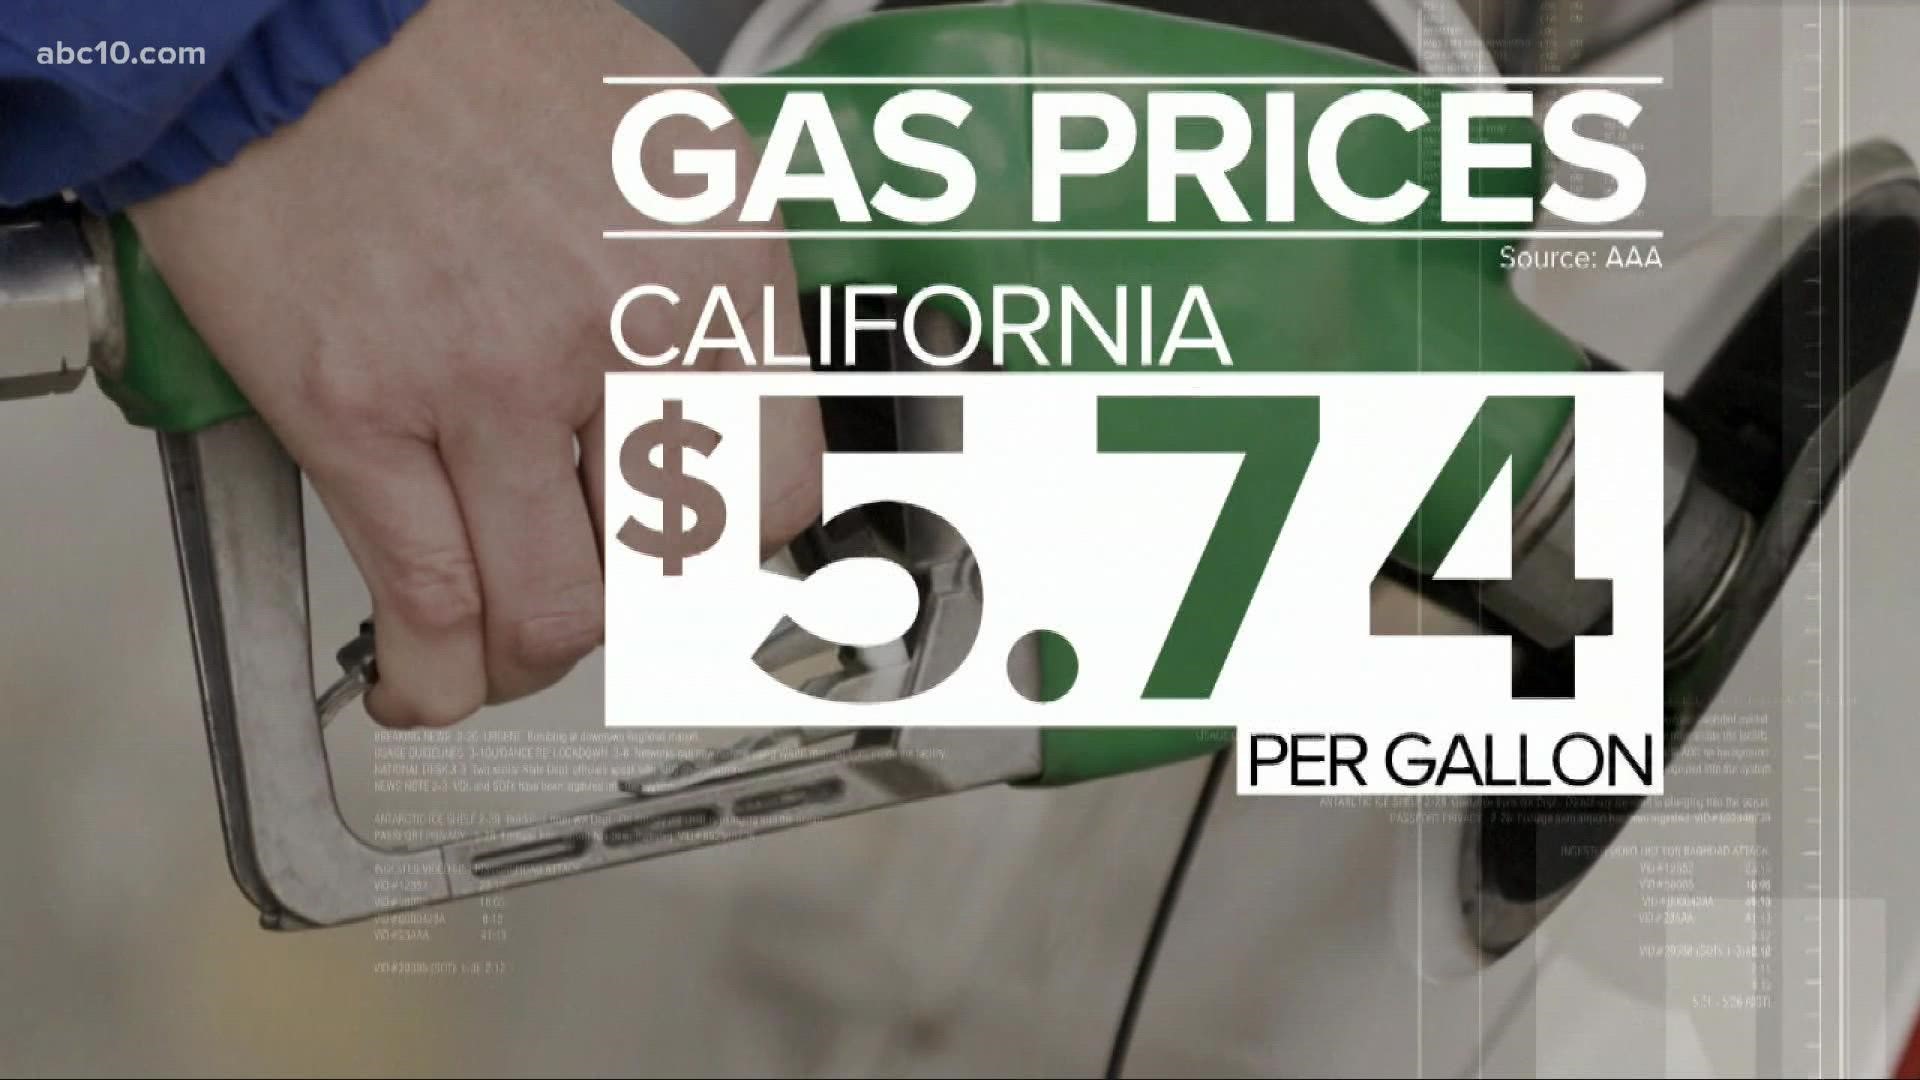 California has the highest gas prices in the country, and law enforcement across the state is warning of new schemes and thefts on gas rising.